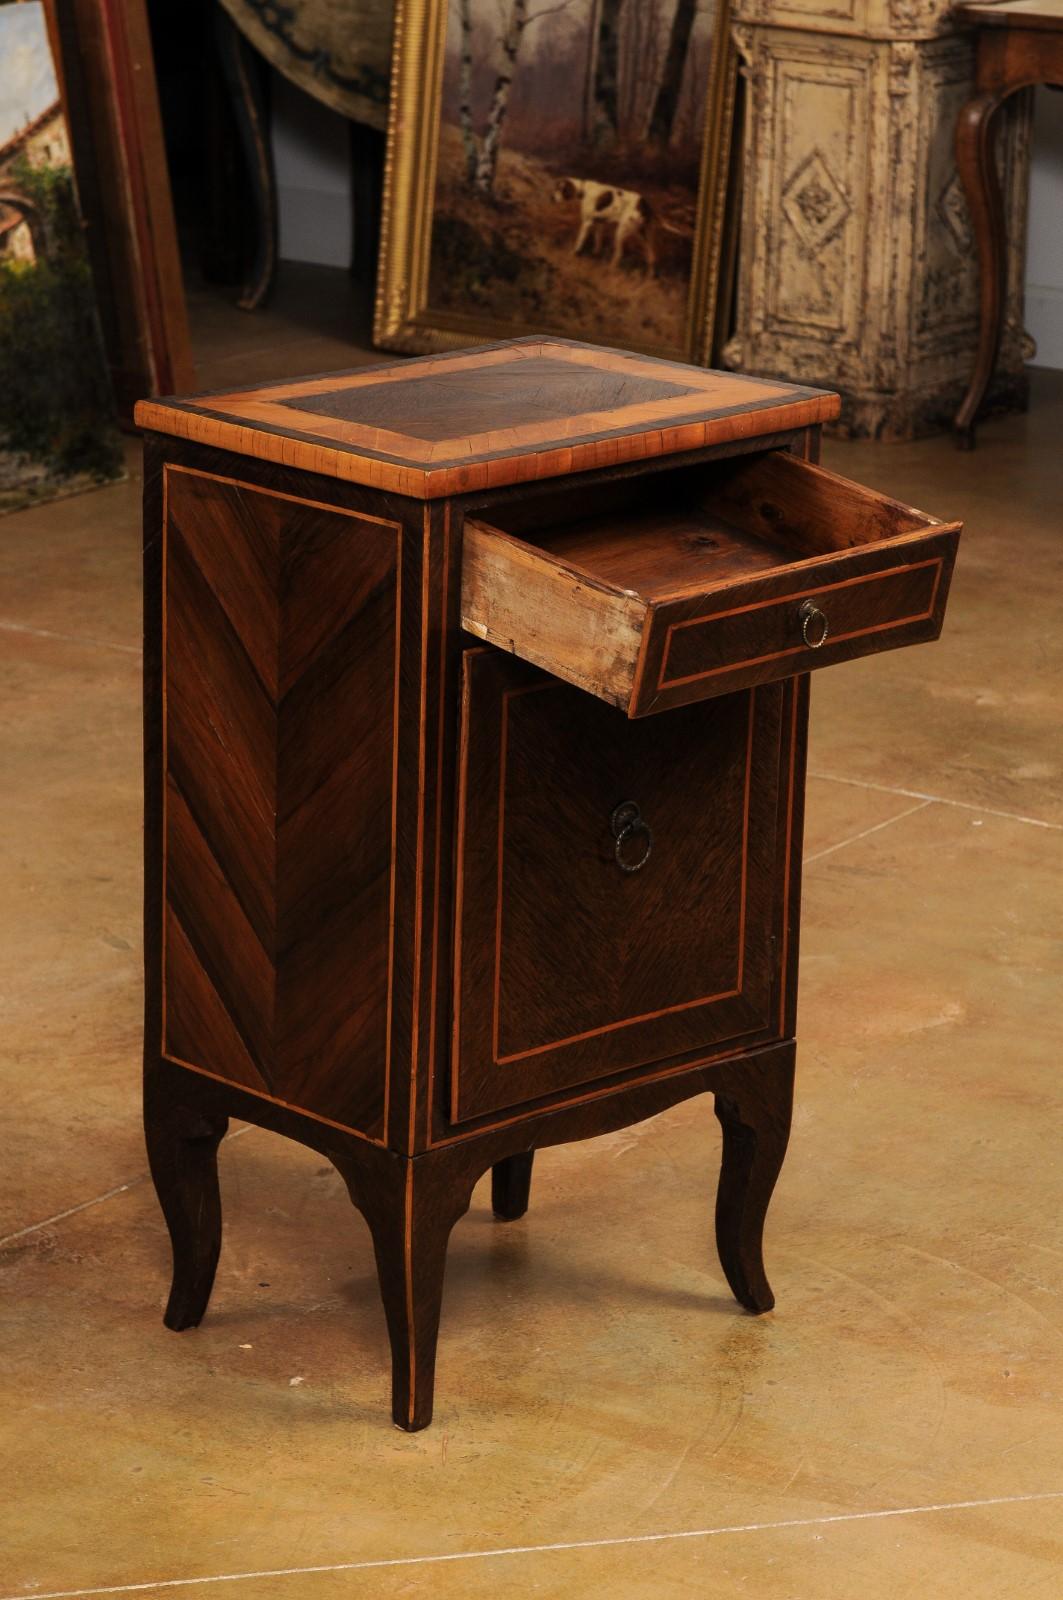 Italian 19th Century Bedside Table with Inlaid Décor, Single Drawer and Door In Good Condition For Sale In Atlanta, GA